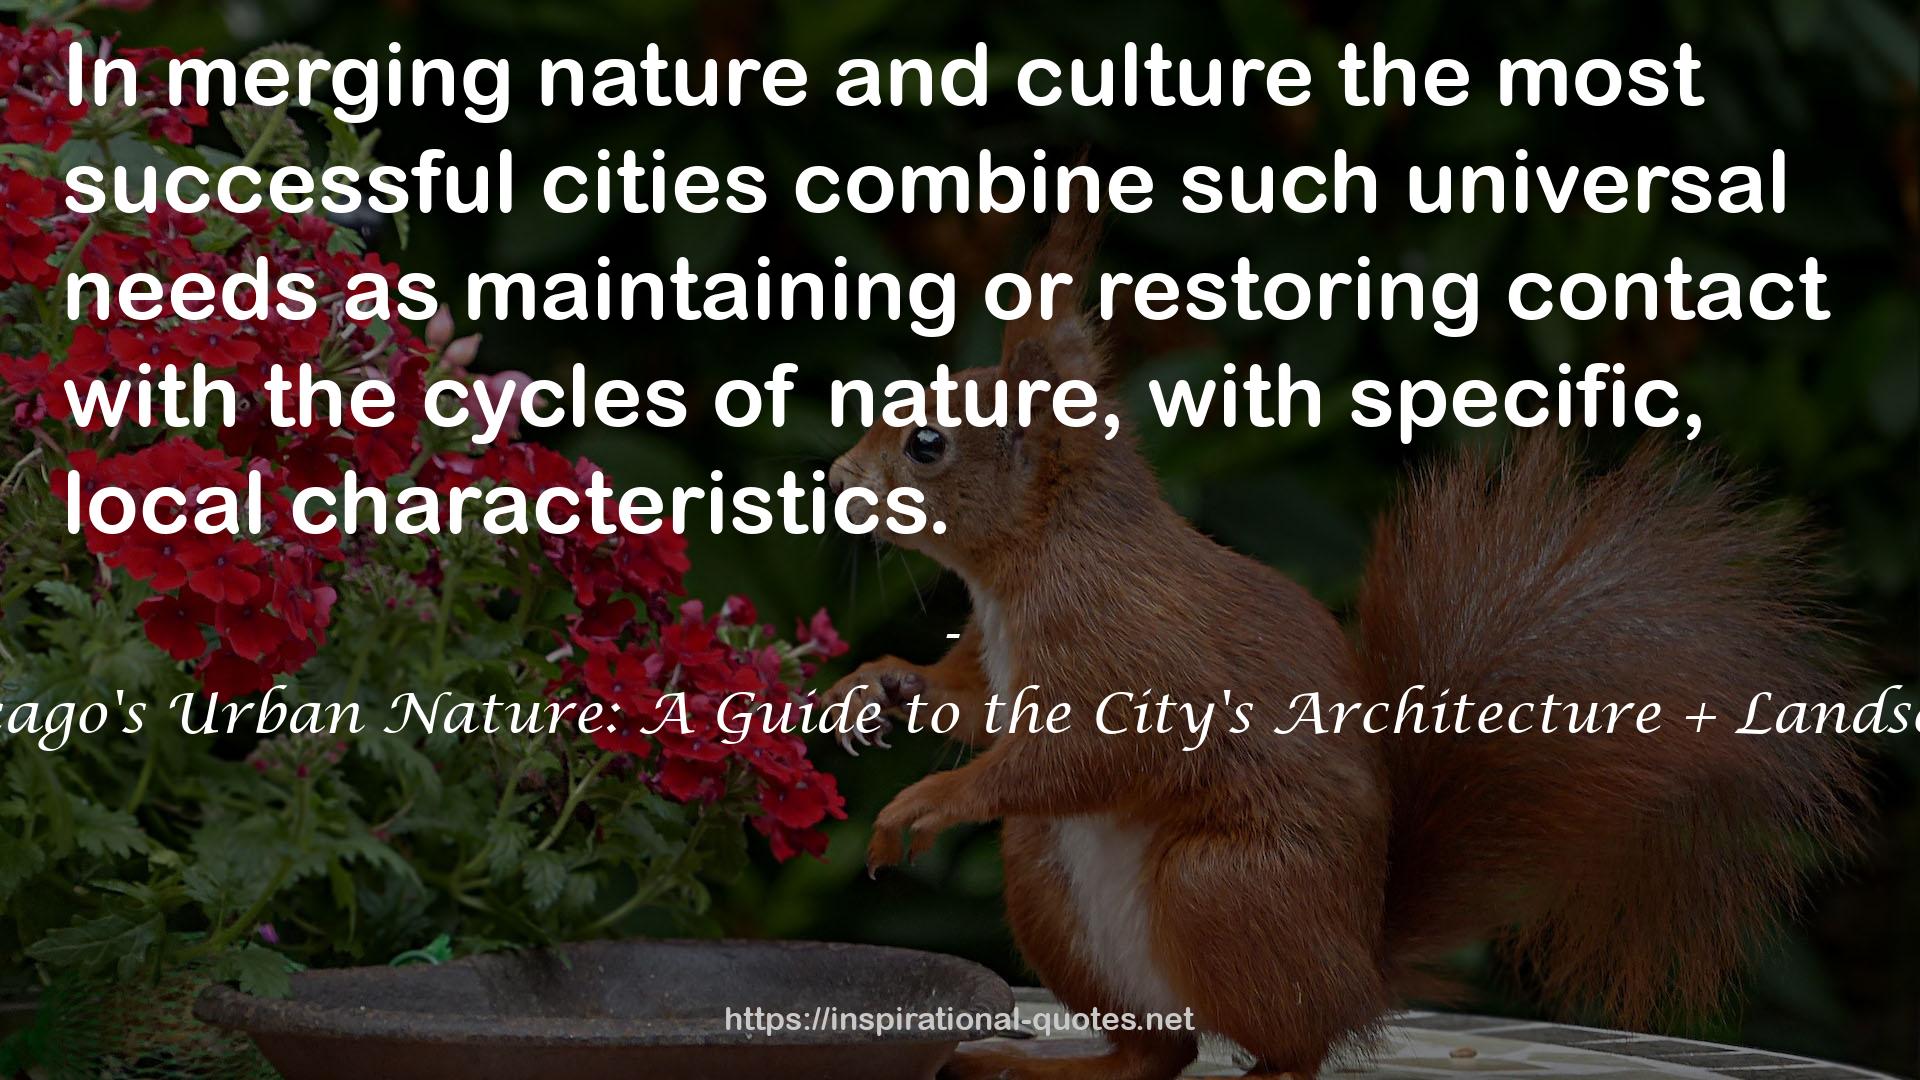 Chicago's Urban Nature: A Guide to the City's Architecture + Landscape QUOTES